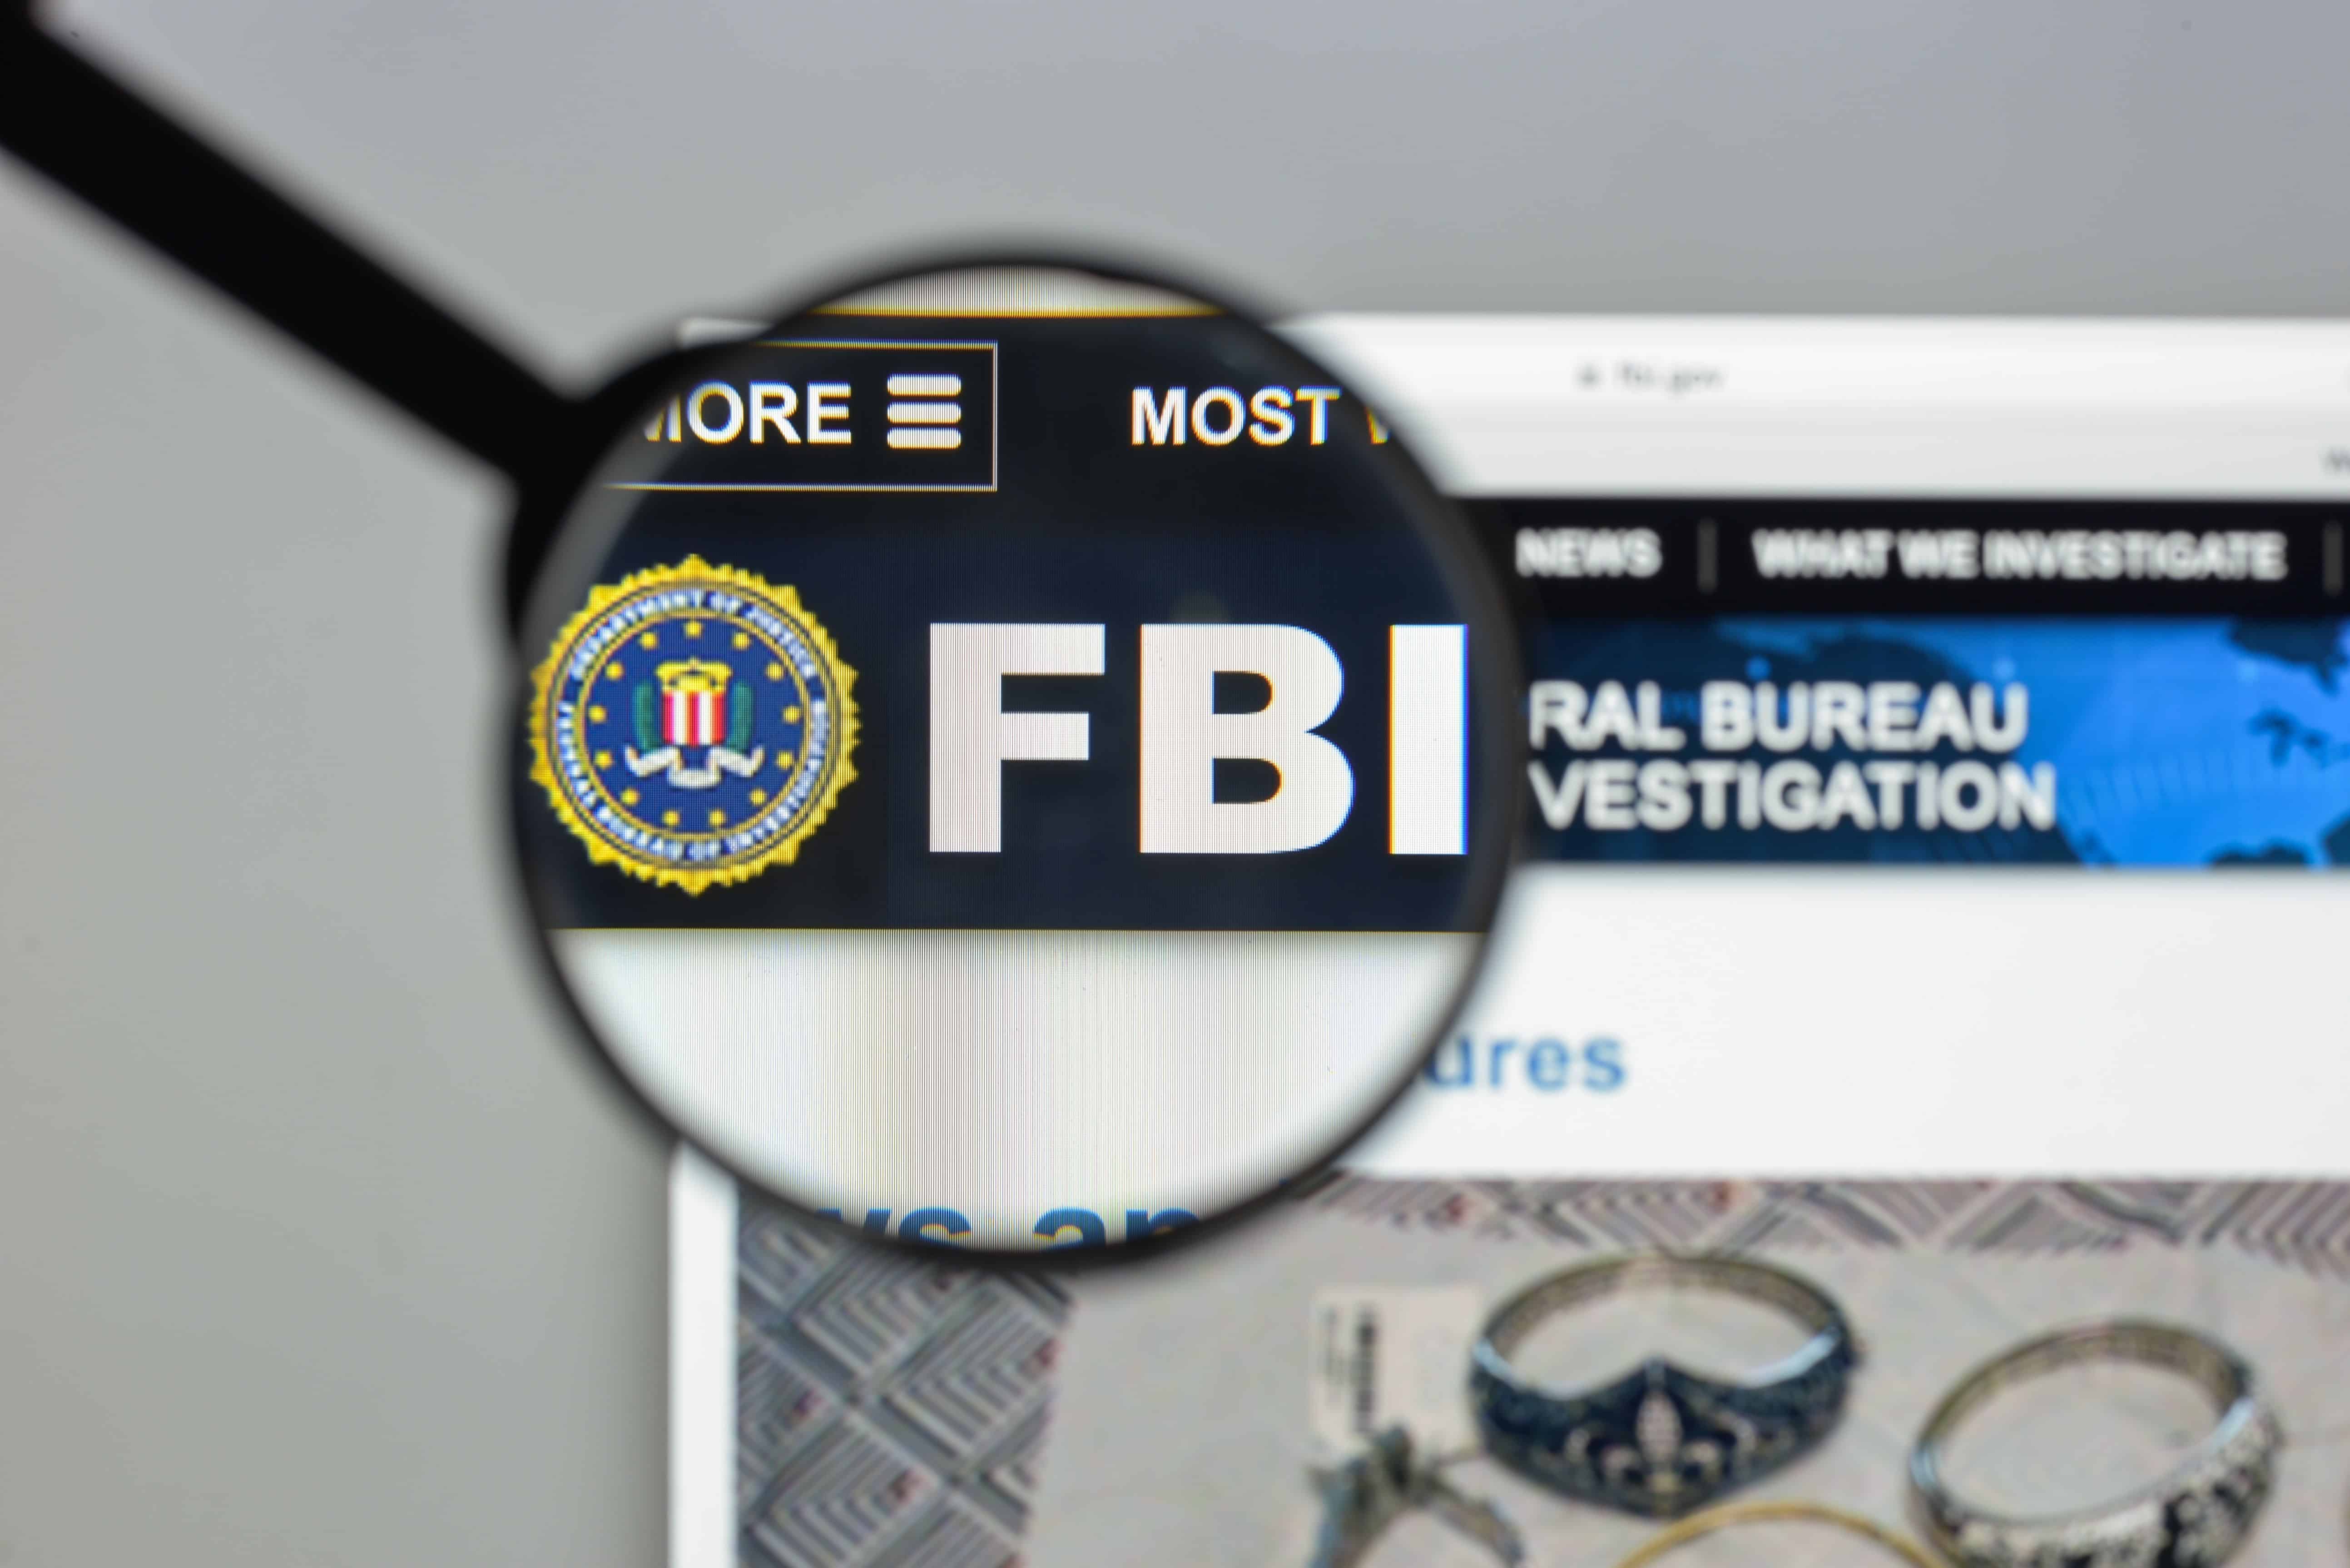 Milan, Italy - August 10, 2017: Fbi website homepage. It is the domestic intelligence and security service of the United States, and its principal federal law agency. FBI logo visible.